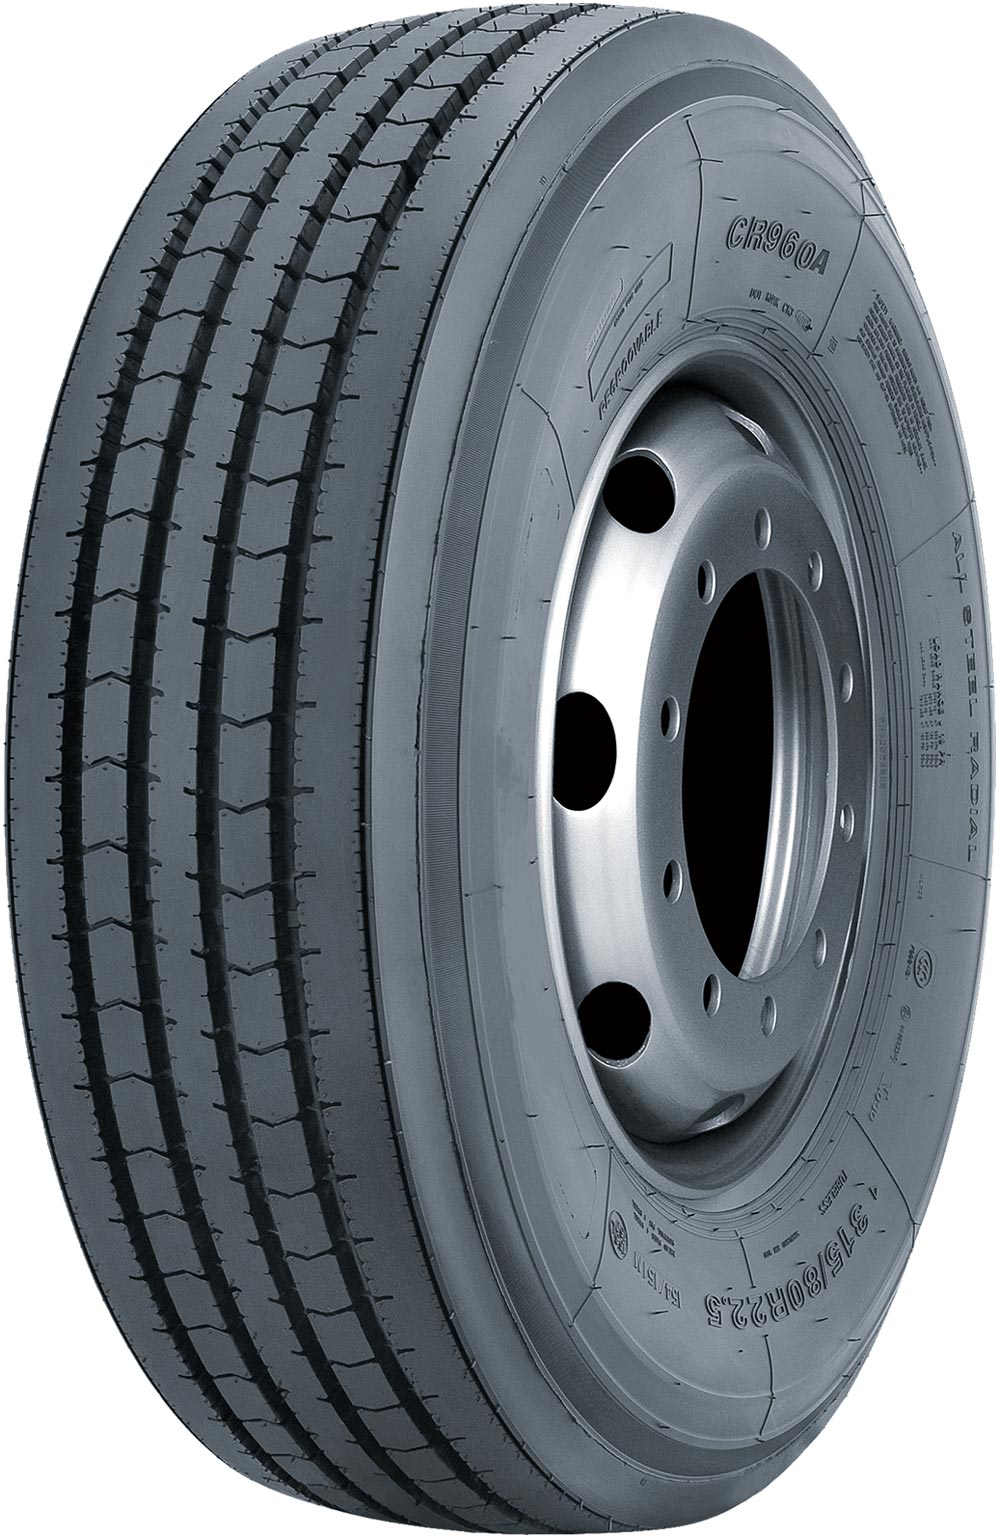 product_type-heavy_tires GOODRIDE CR960A 315/70 R22.5 156L